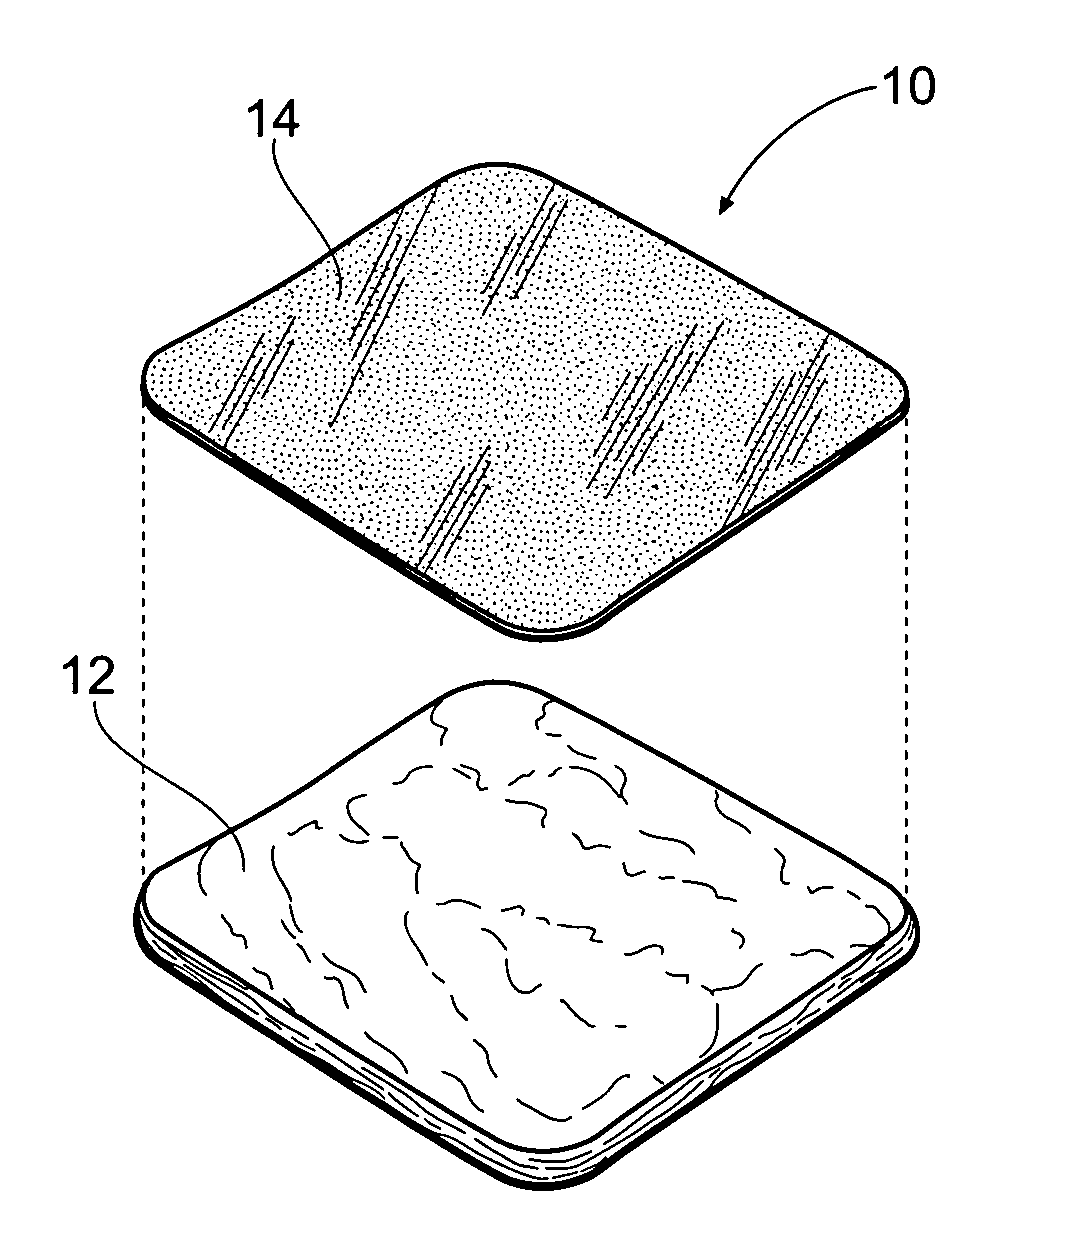 Antimicrobial barriers, systems, and methods formed from hydrophilic polymer structures such as chistosan